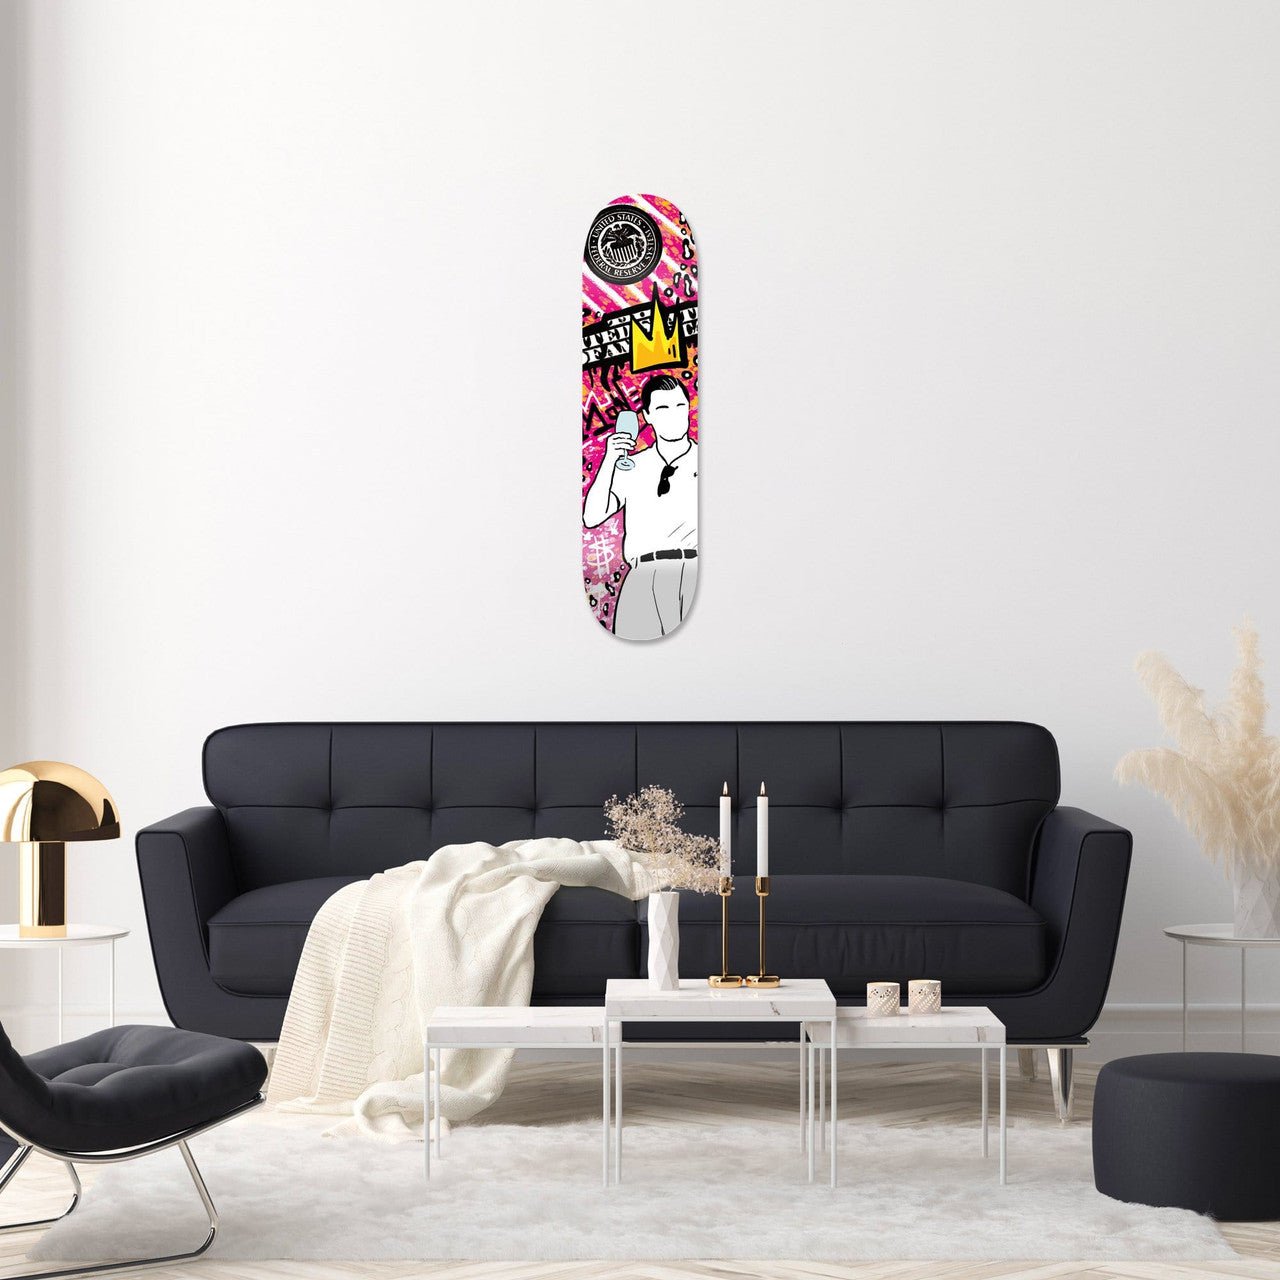 Bundle: "The Wolf: Who's the Boss? & Fist Bite & King" - Skateboard - The Art Lab Acrylic Glass Art - Skateboards, Surfboards & Glass Prints Wall Decor for your Home.